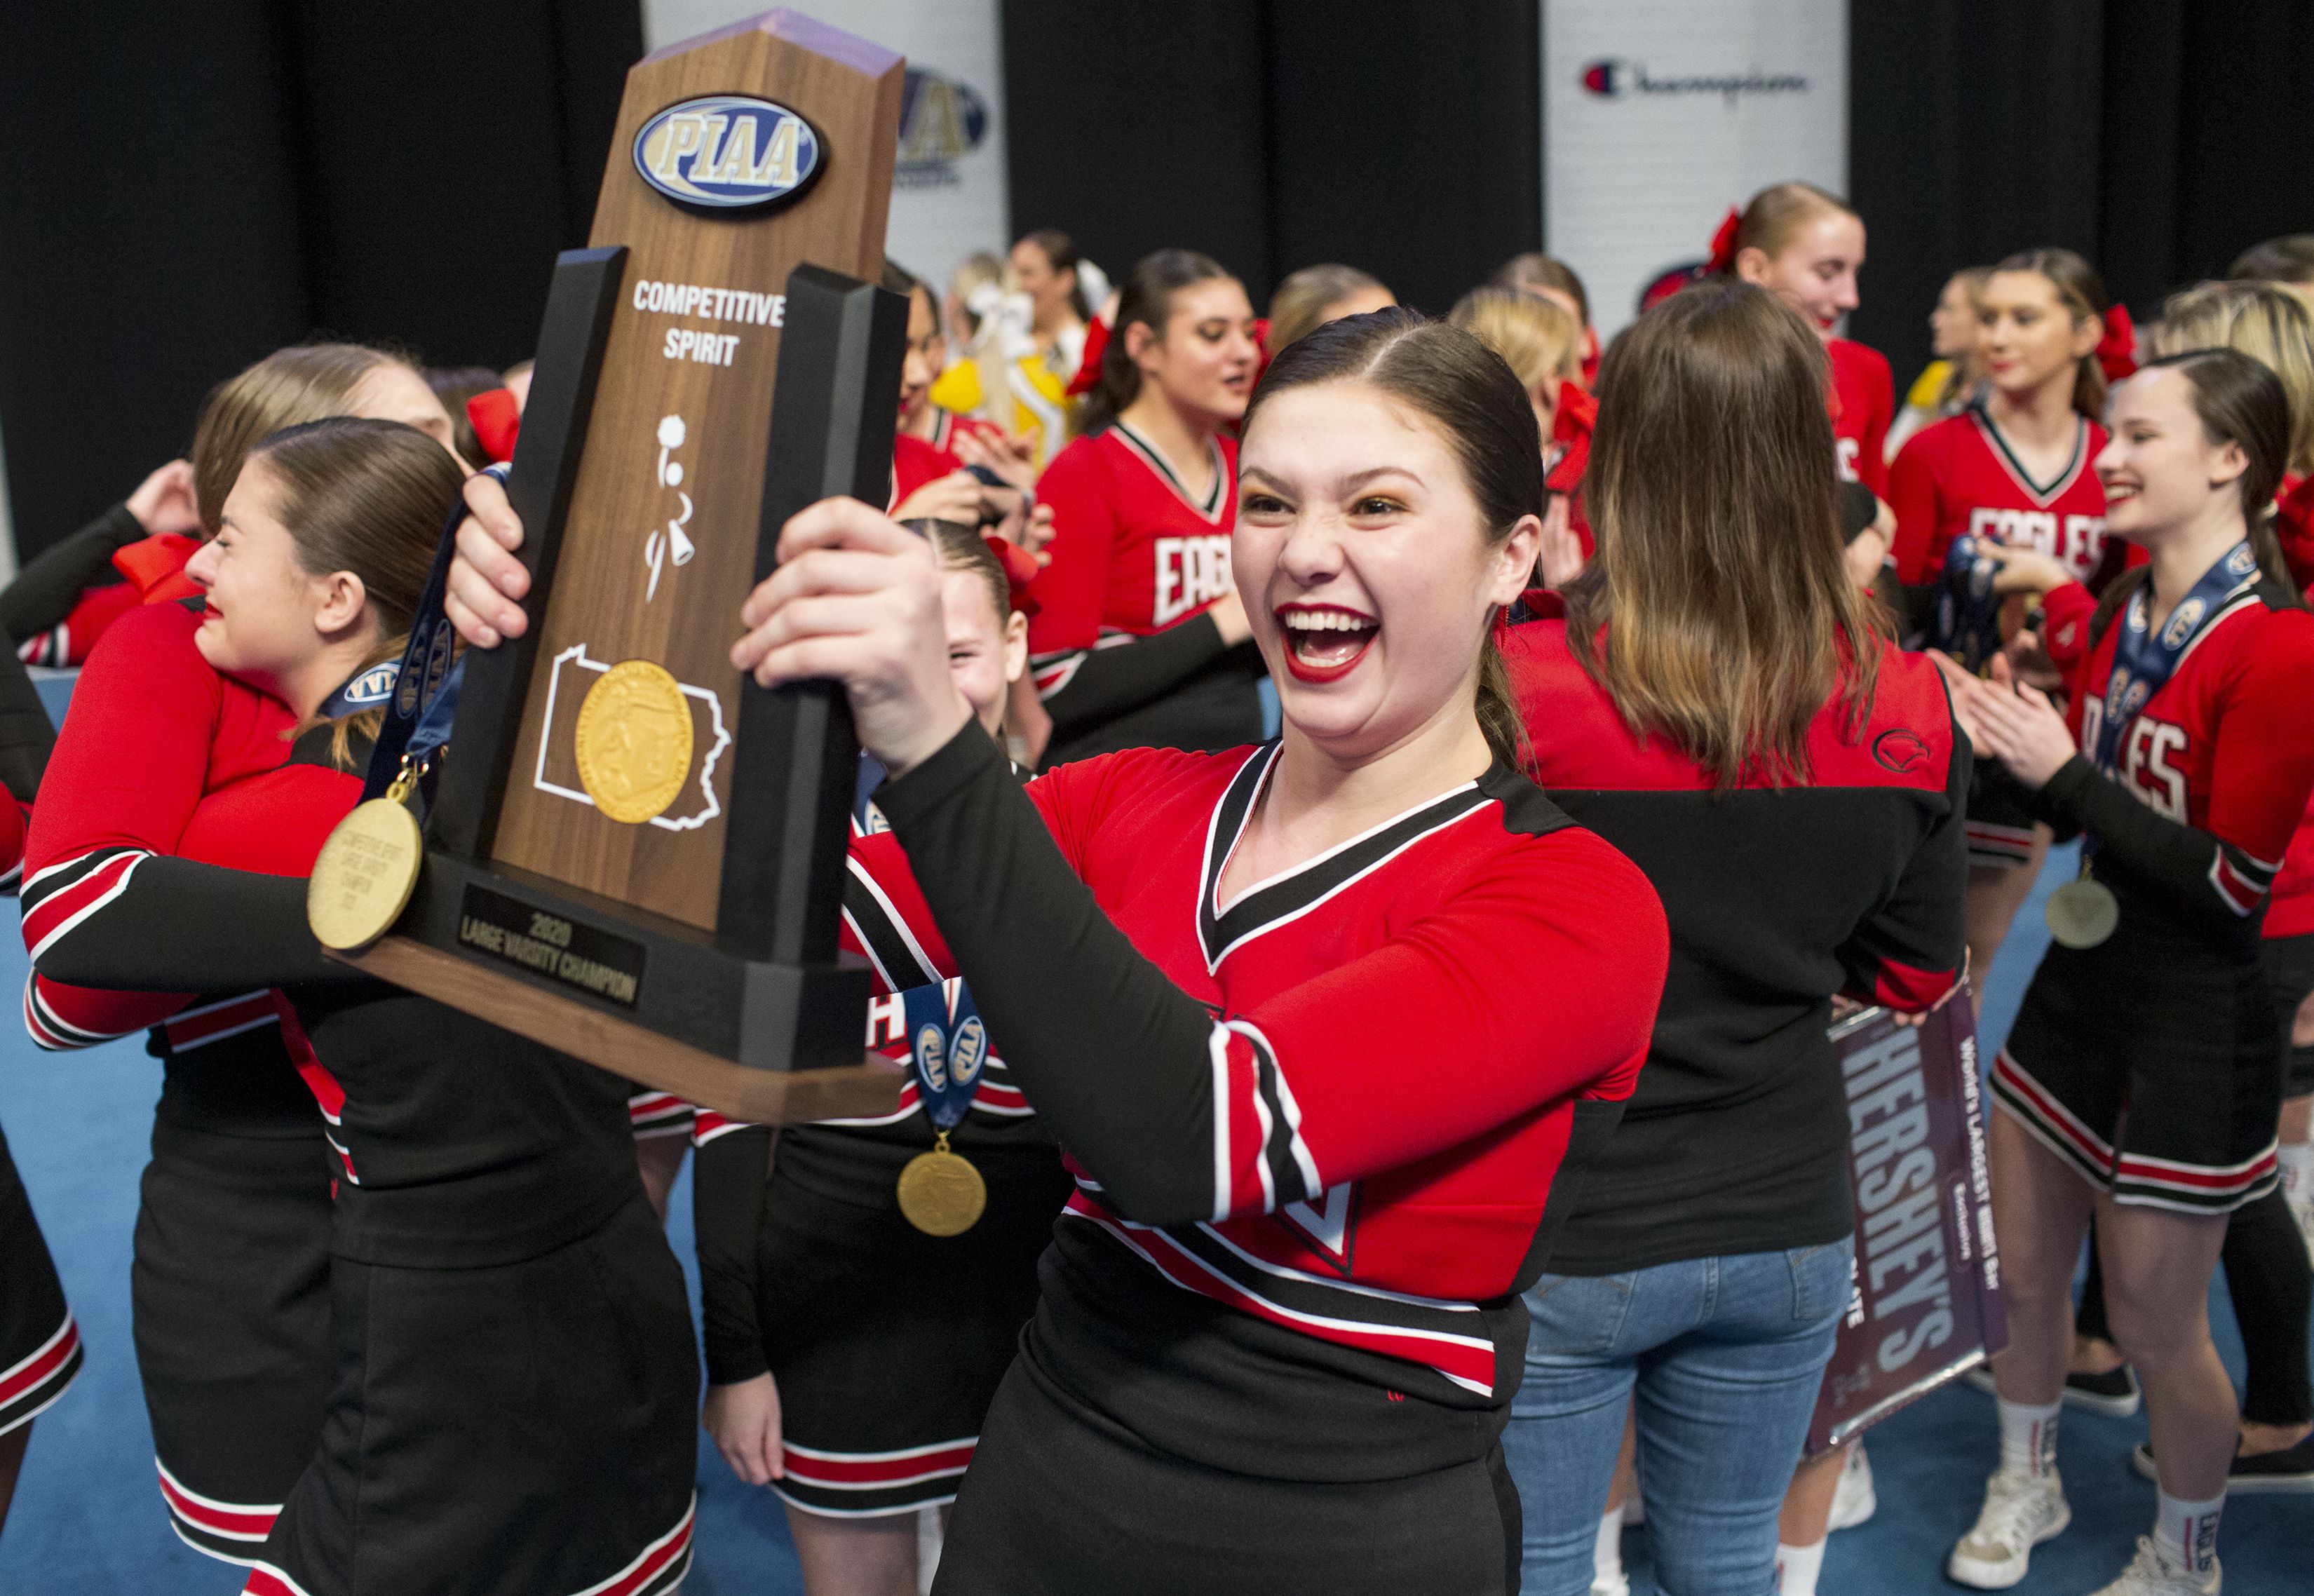 Cumberland Valley claims fifth large varsity competitive cheer championship  